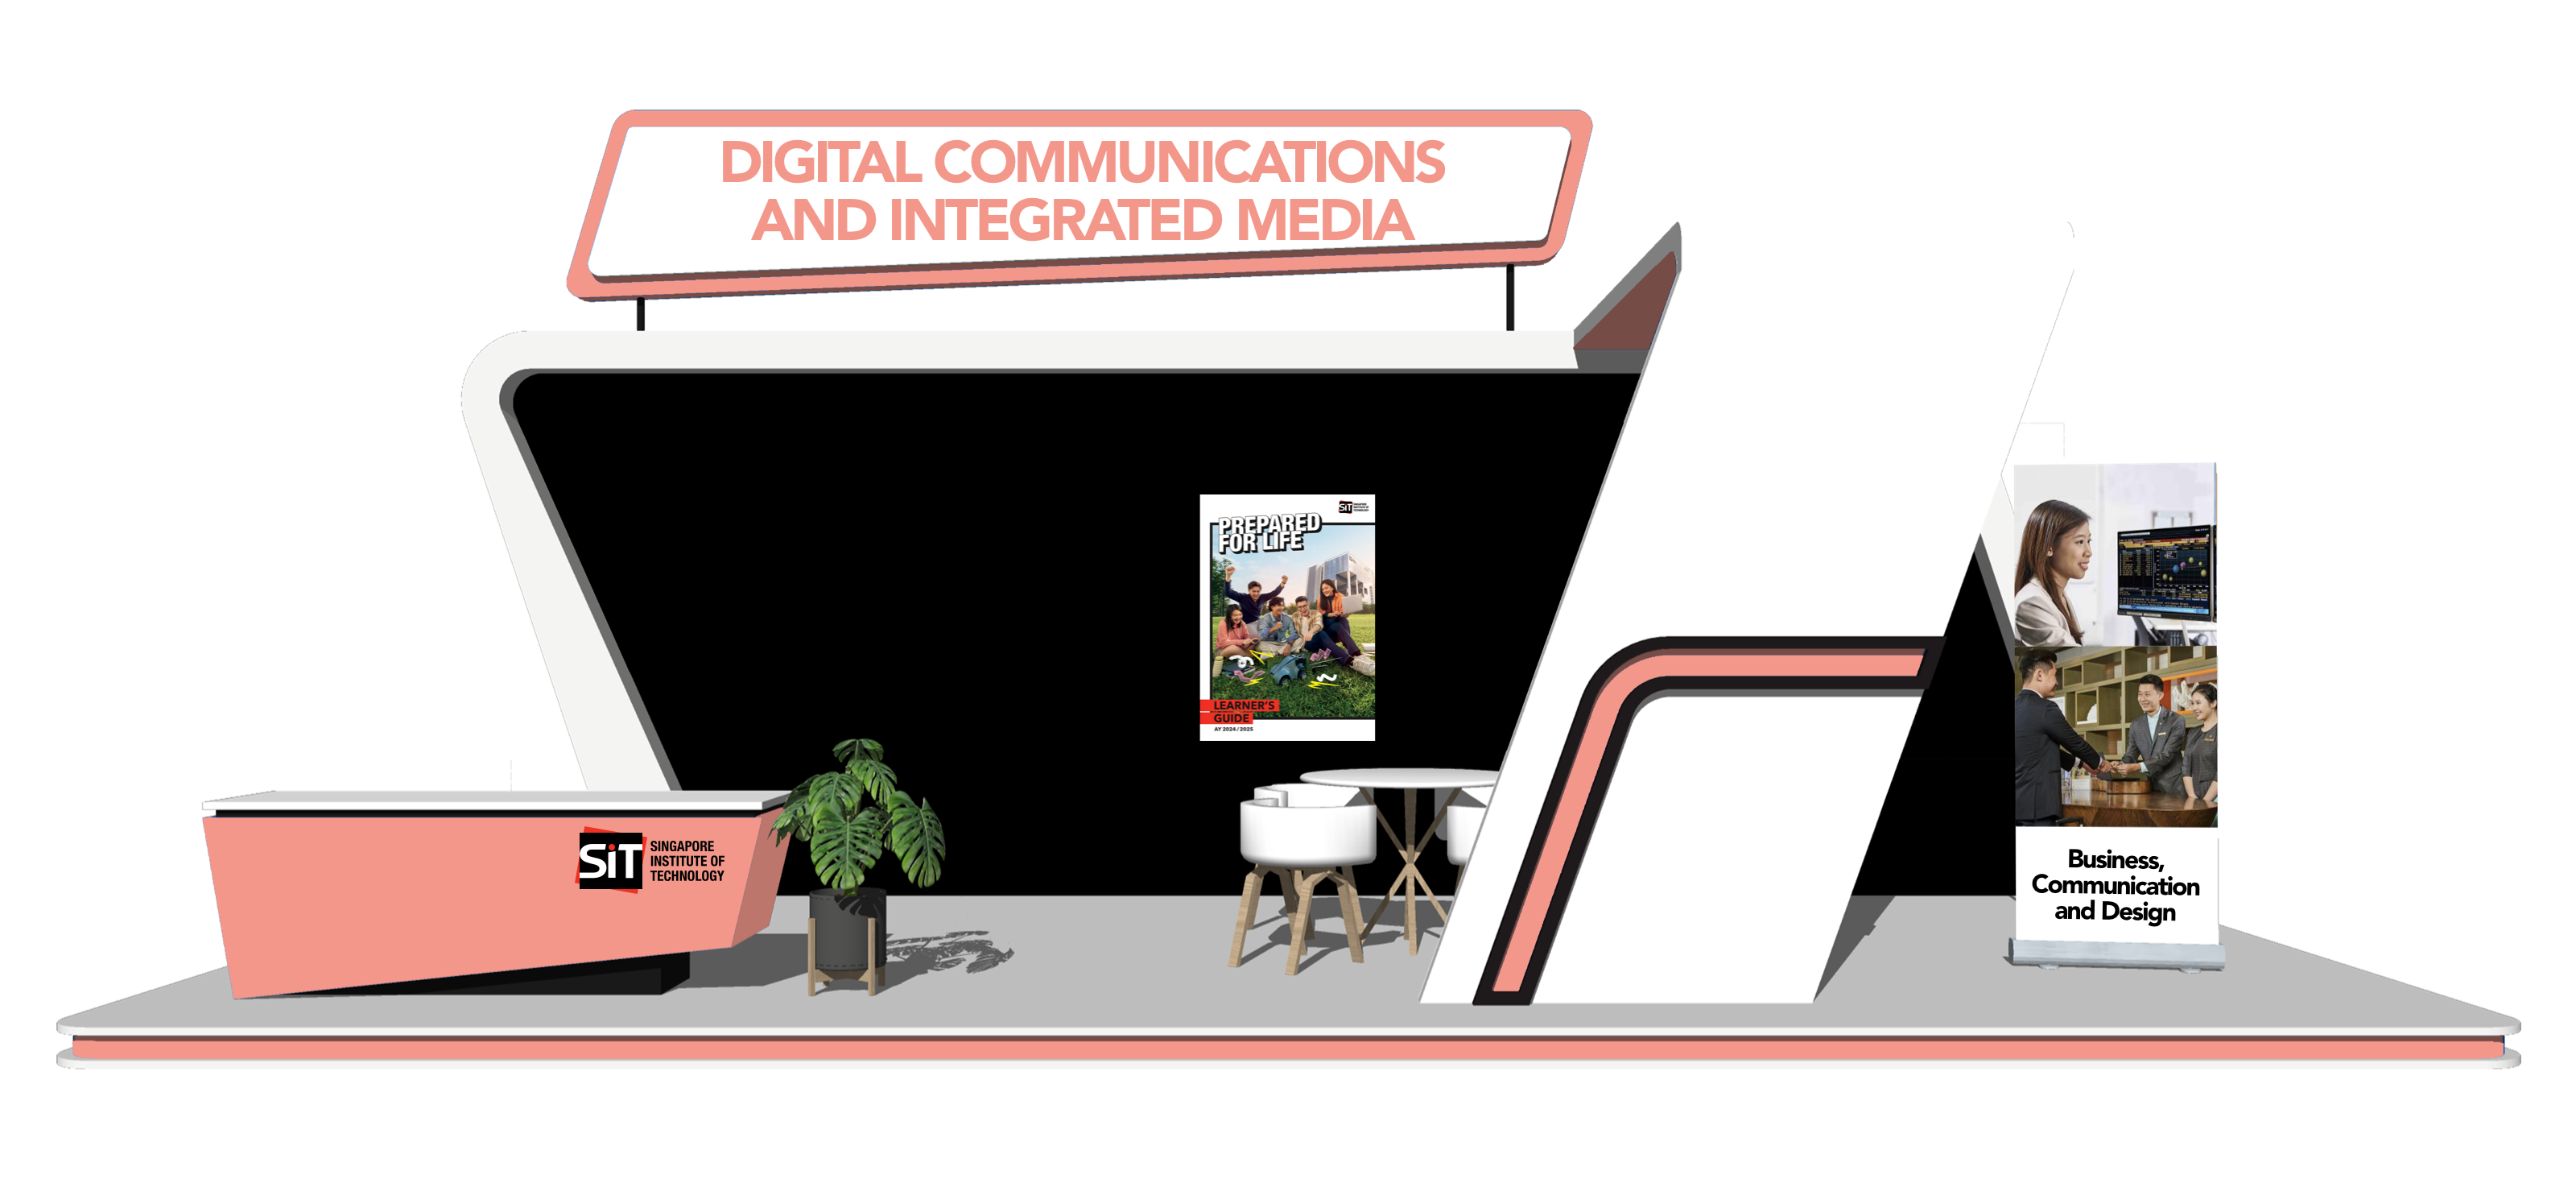 Digital Communications and Integrated Media